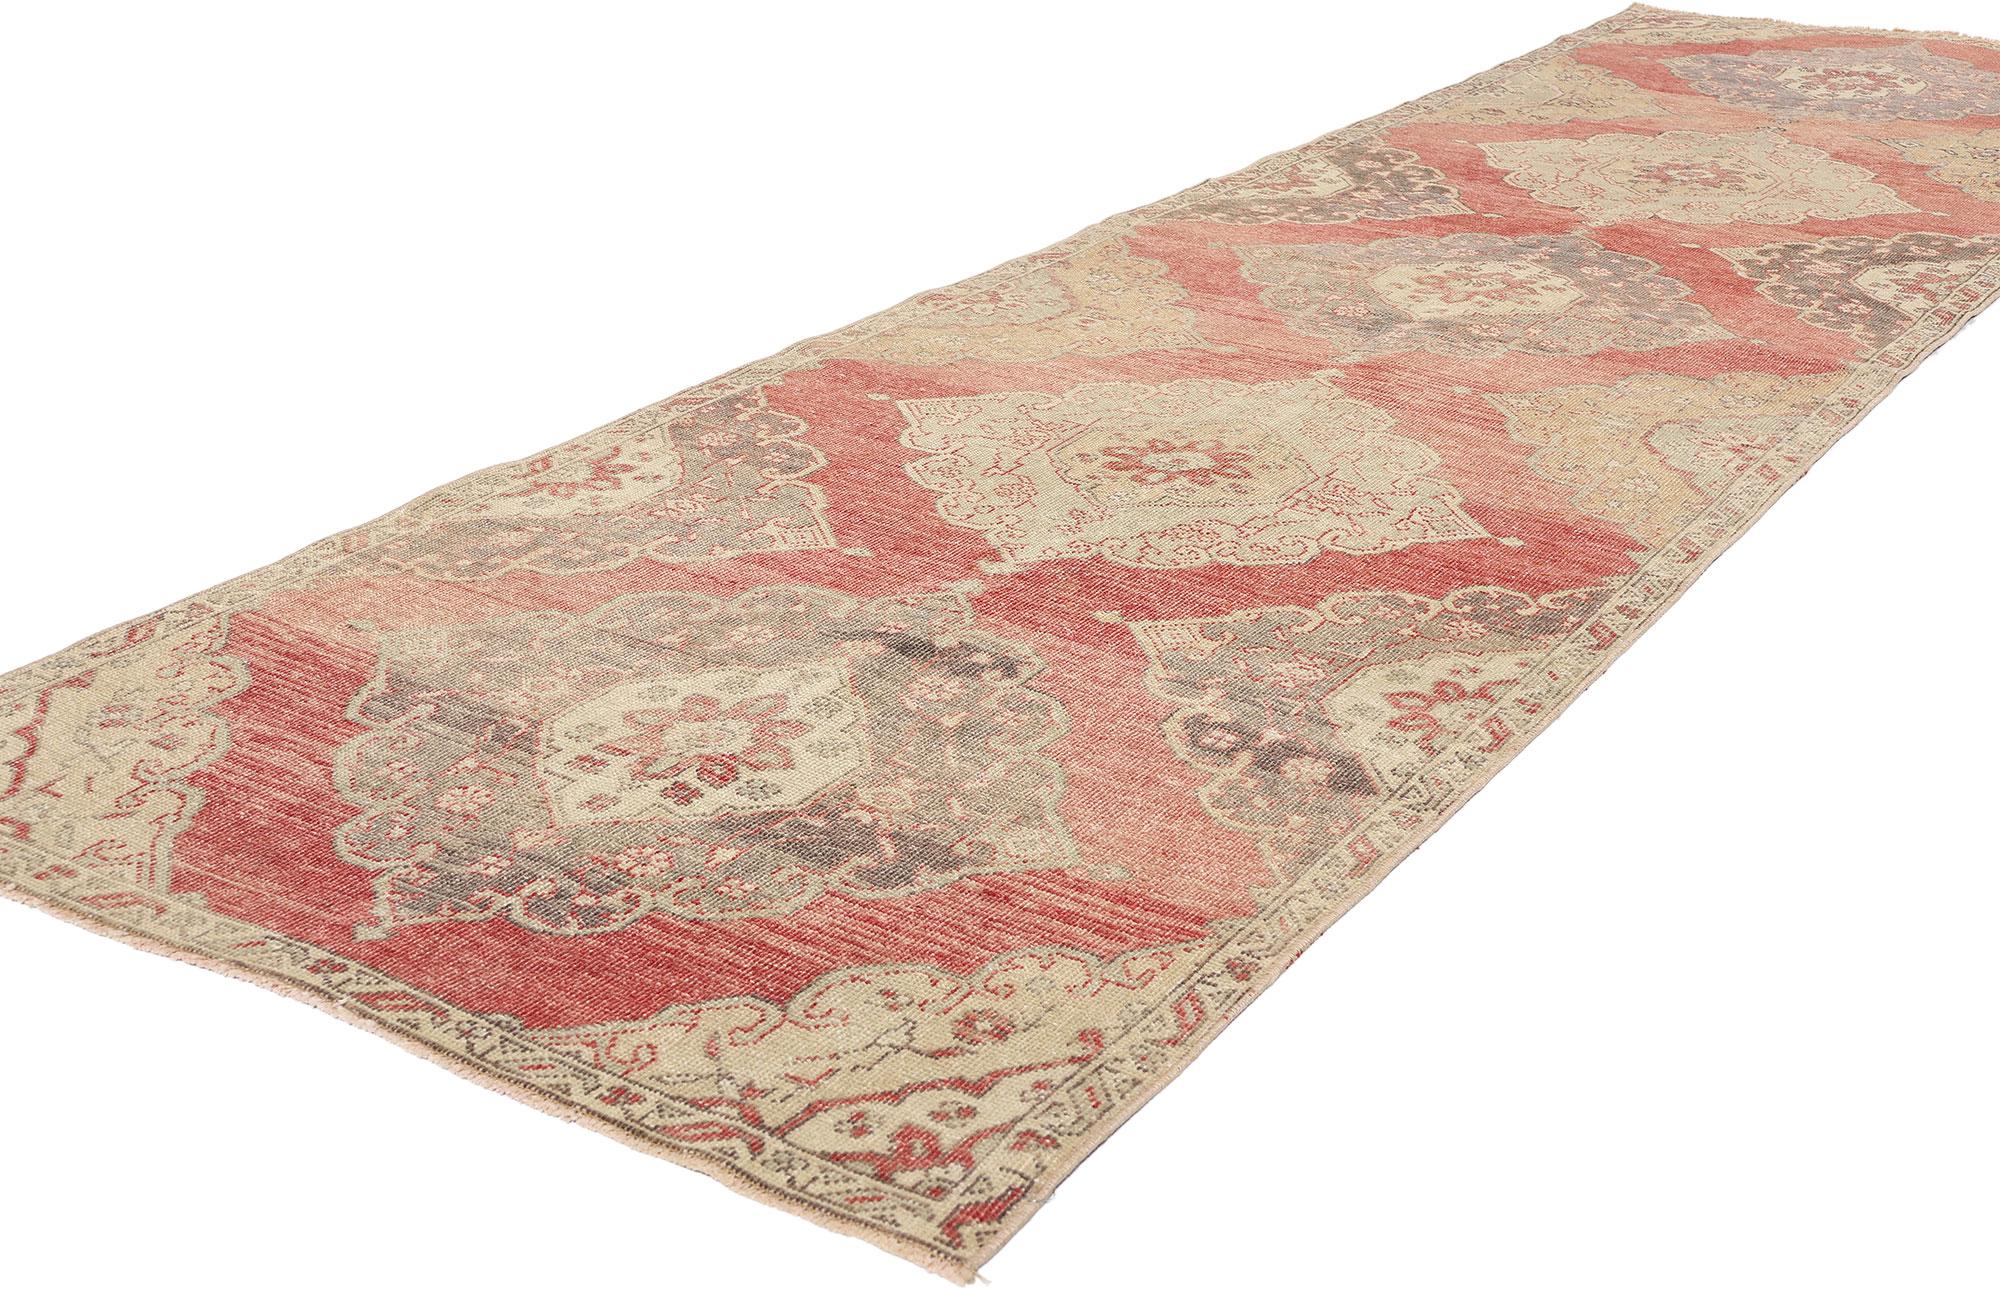 53912 Vintage Red Turkish Oushak Rug, 03'03 x 12'01. Please note this listing is for one piece. There is a matching piece available adds to its rarity. Turkish Oushak carpet runners represent a classic rug style stemming from the Oushak region in